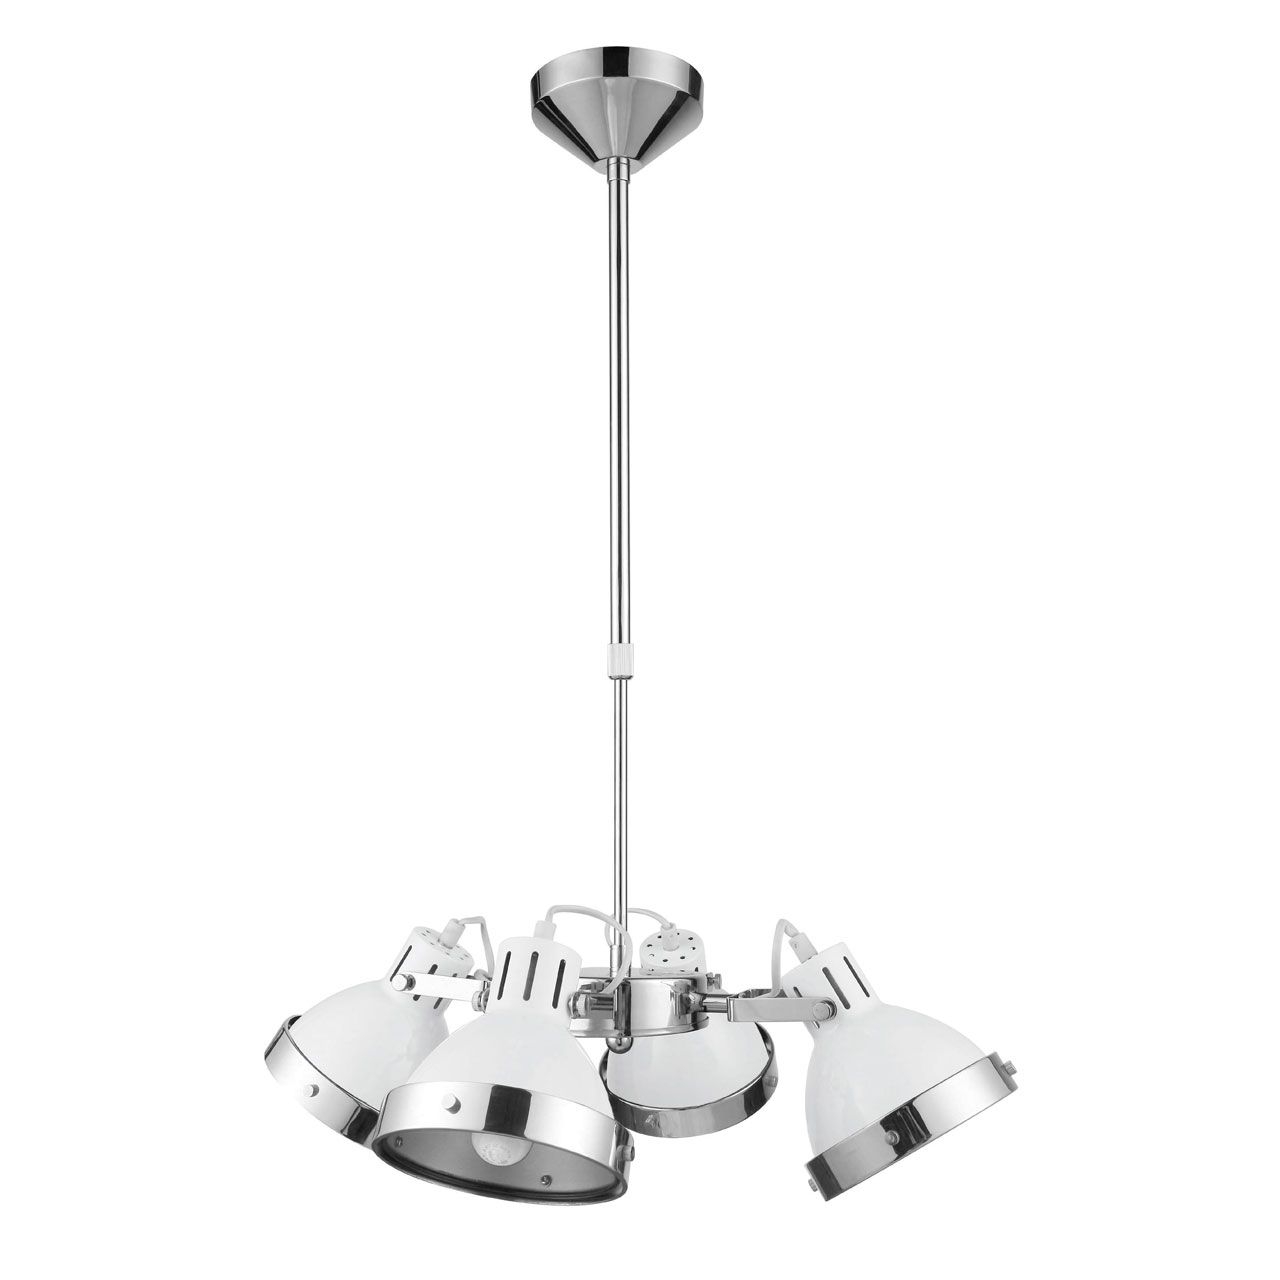 Hexon Contemporary 4 Metal Shades Ceiling Pendant Light In White And Chrome